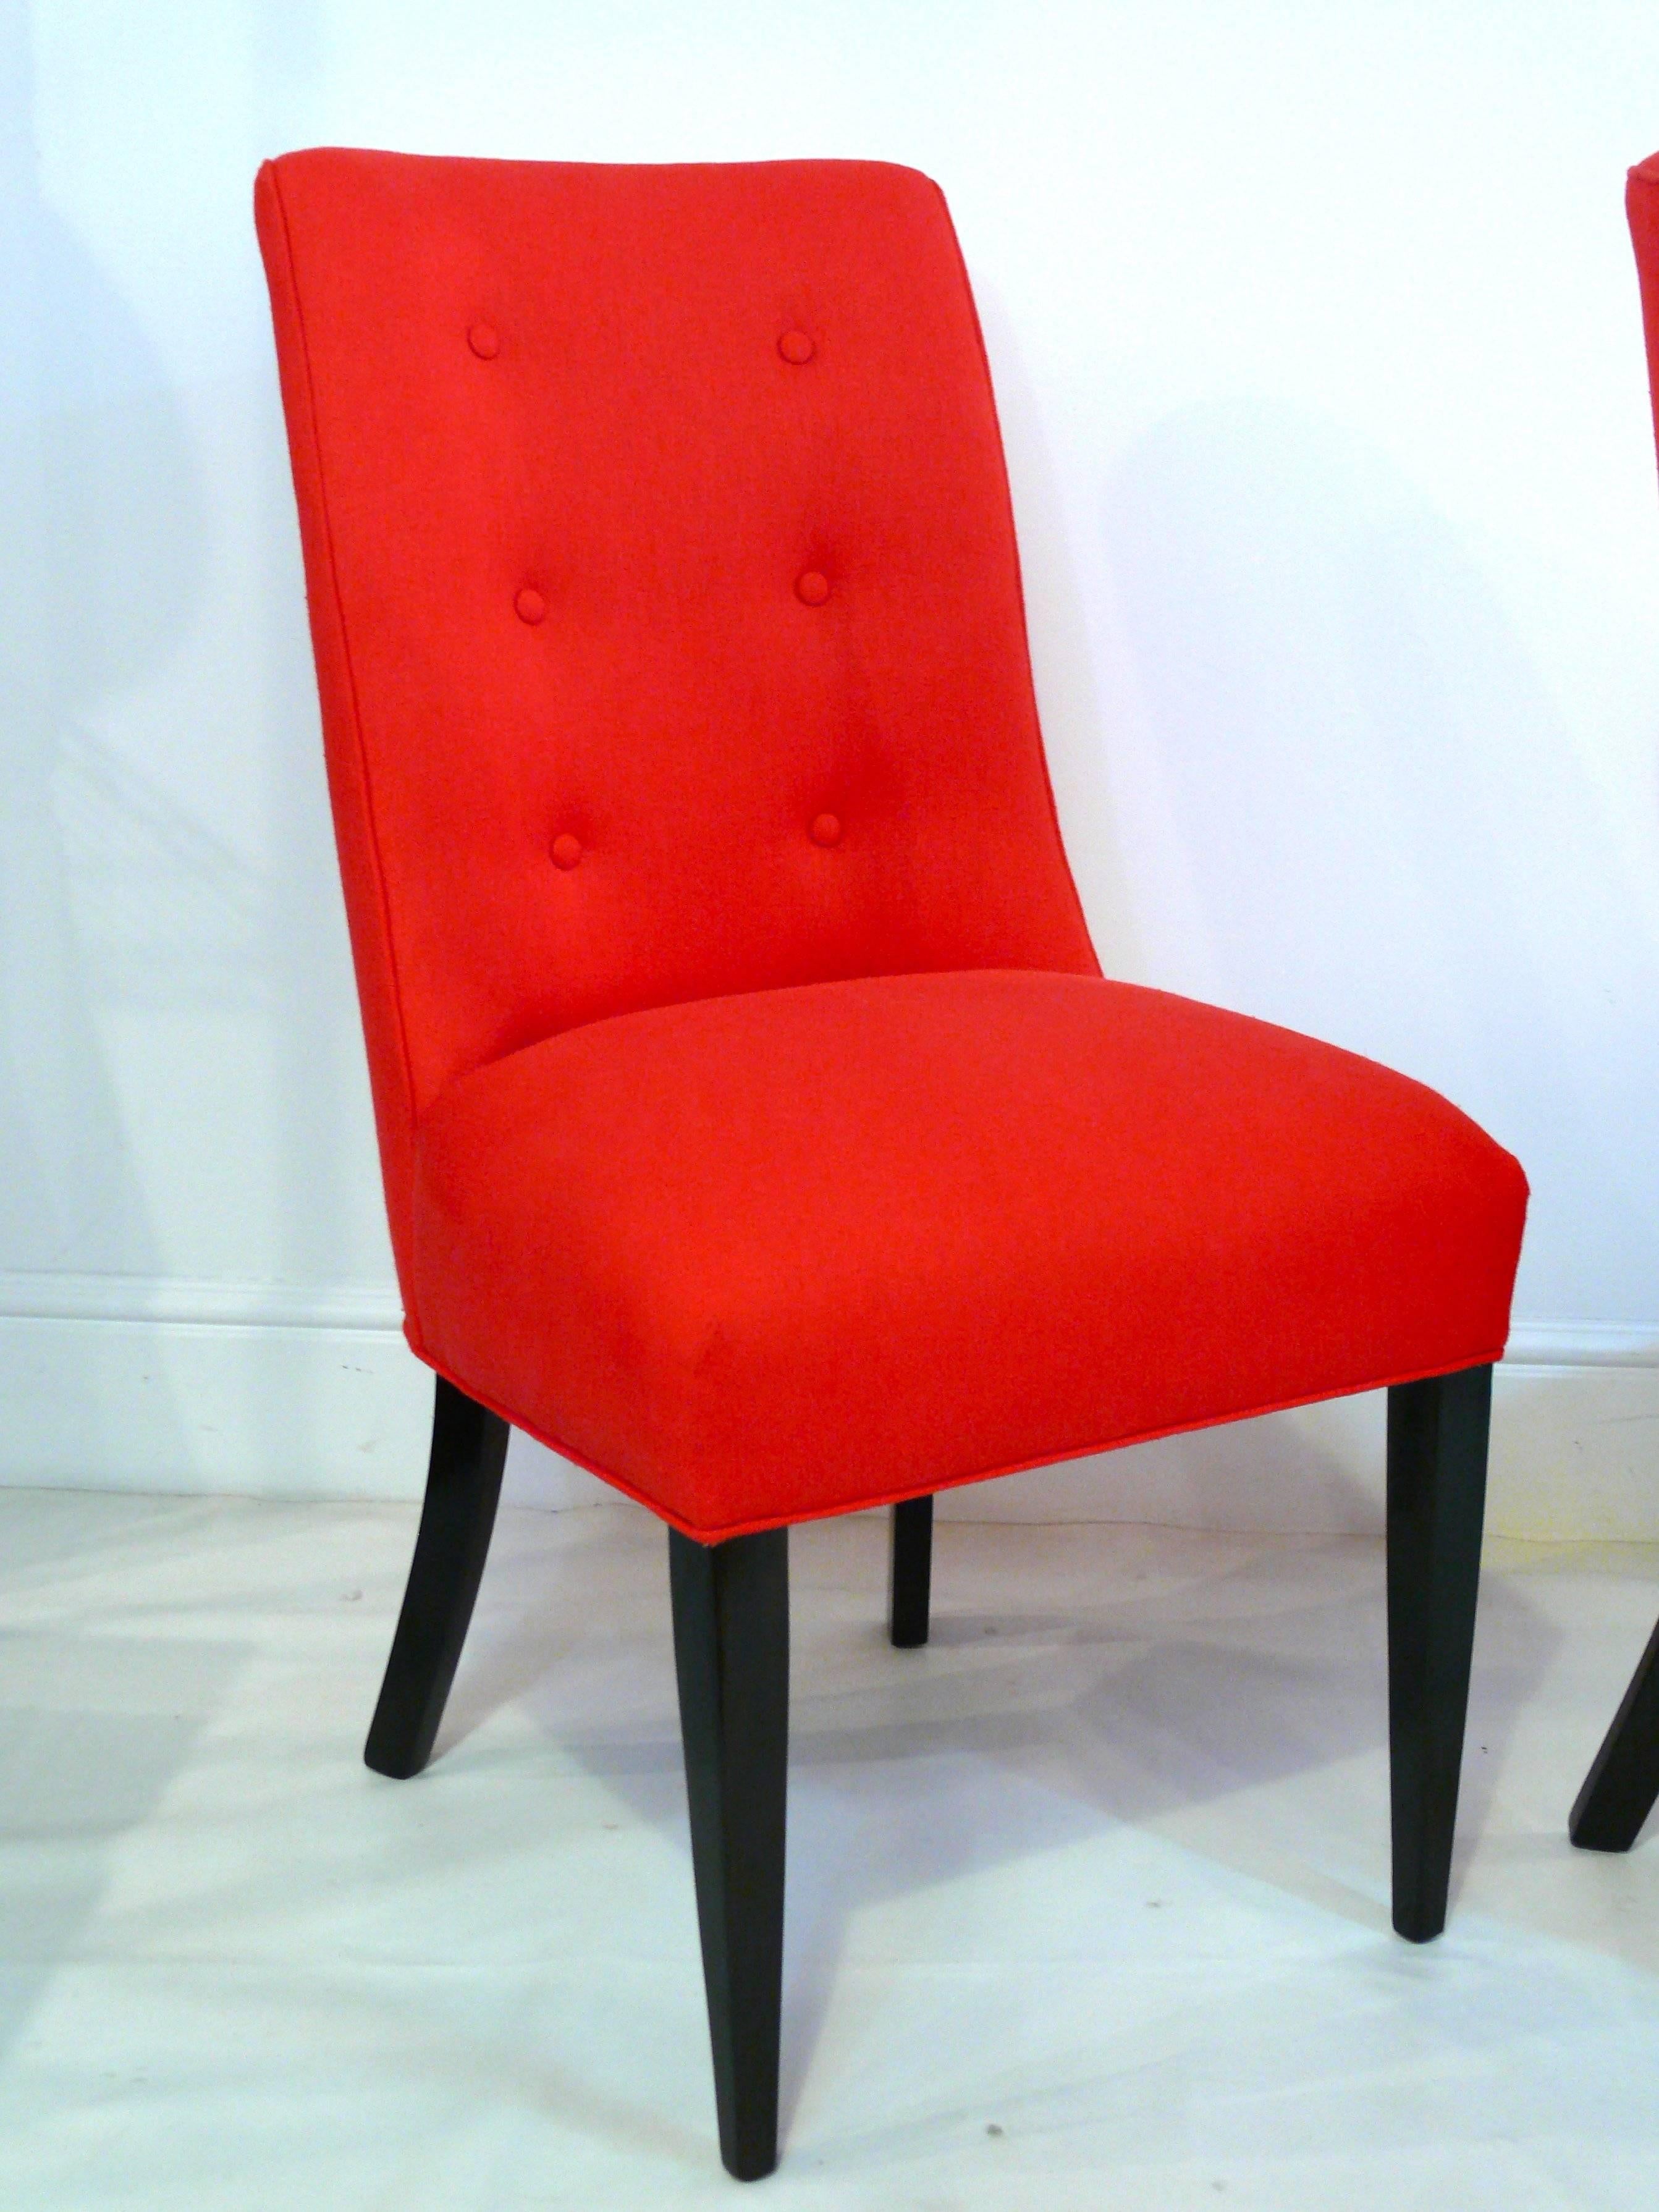 Pair of midcentury button back chairs with splayed back legs. Chairs are covered in a nubby poppy red cotton with ebonized legs. They were refinished and reupholstered about 8 years ago and look as they were hardly sat on. Slight wear on legs